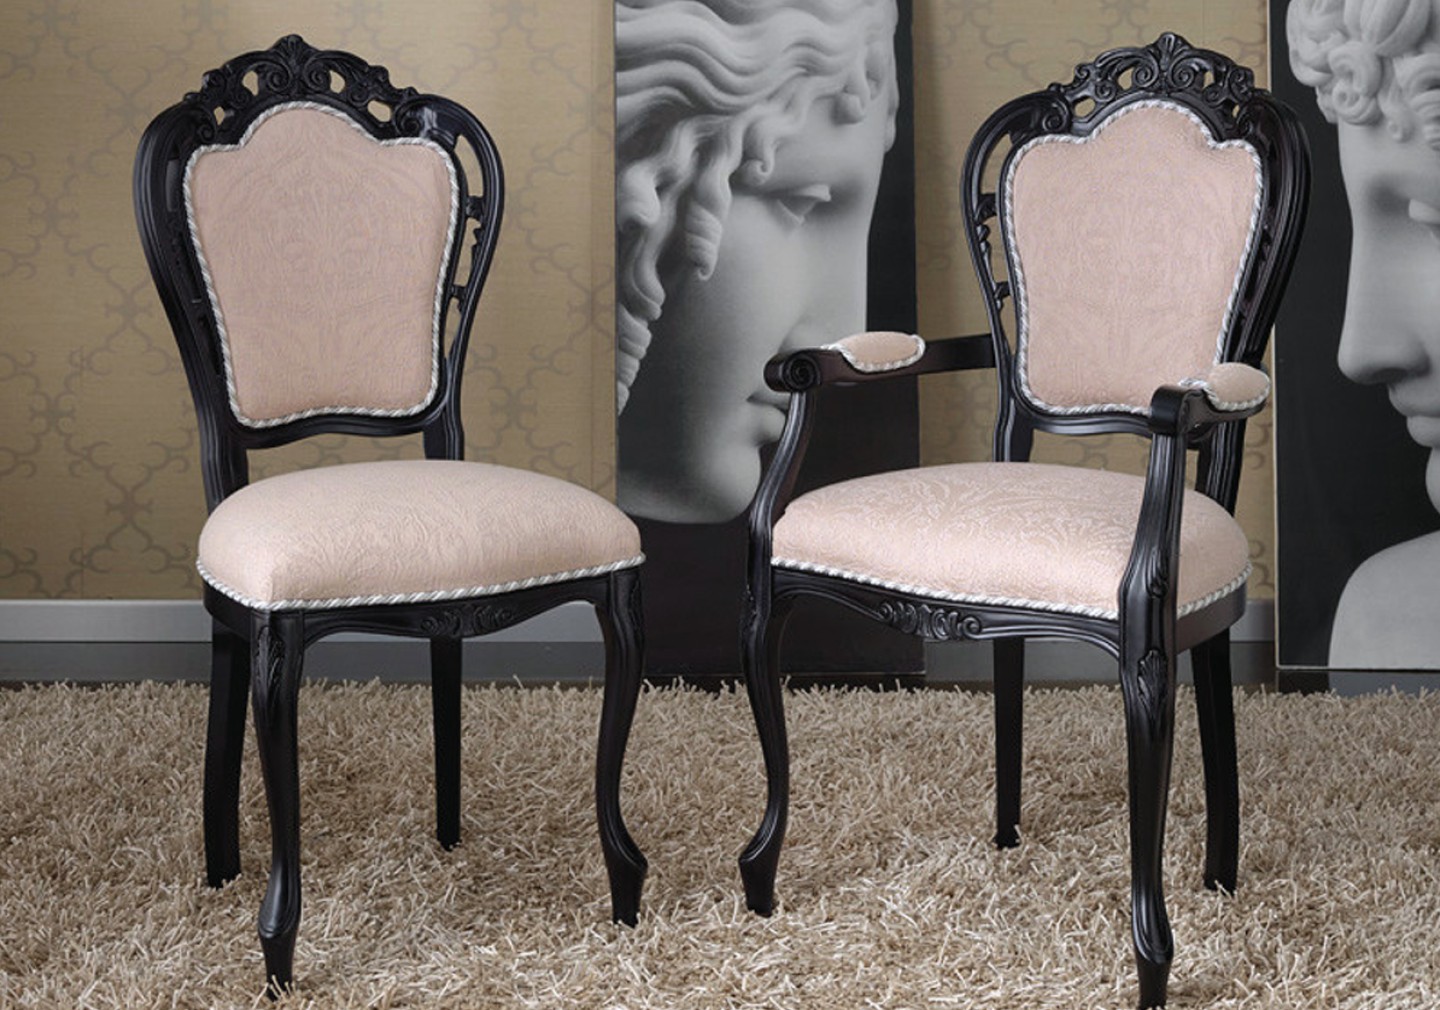 THE VITTORIA CLASSIC DINING CHAIR